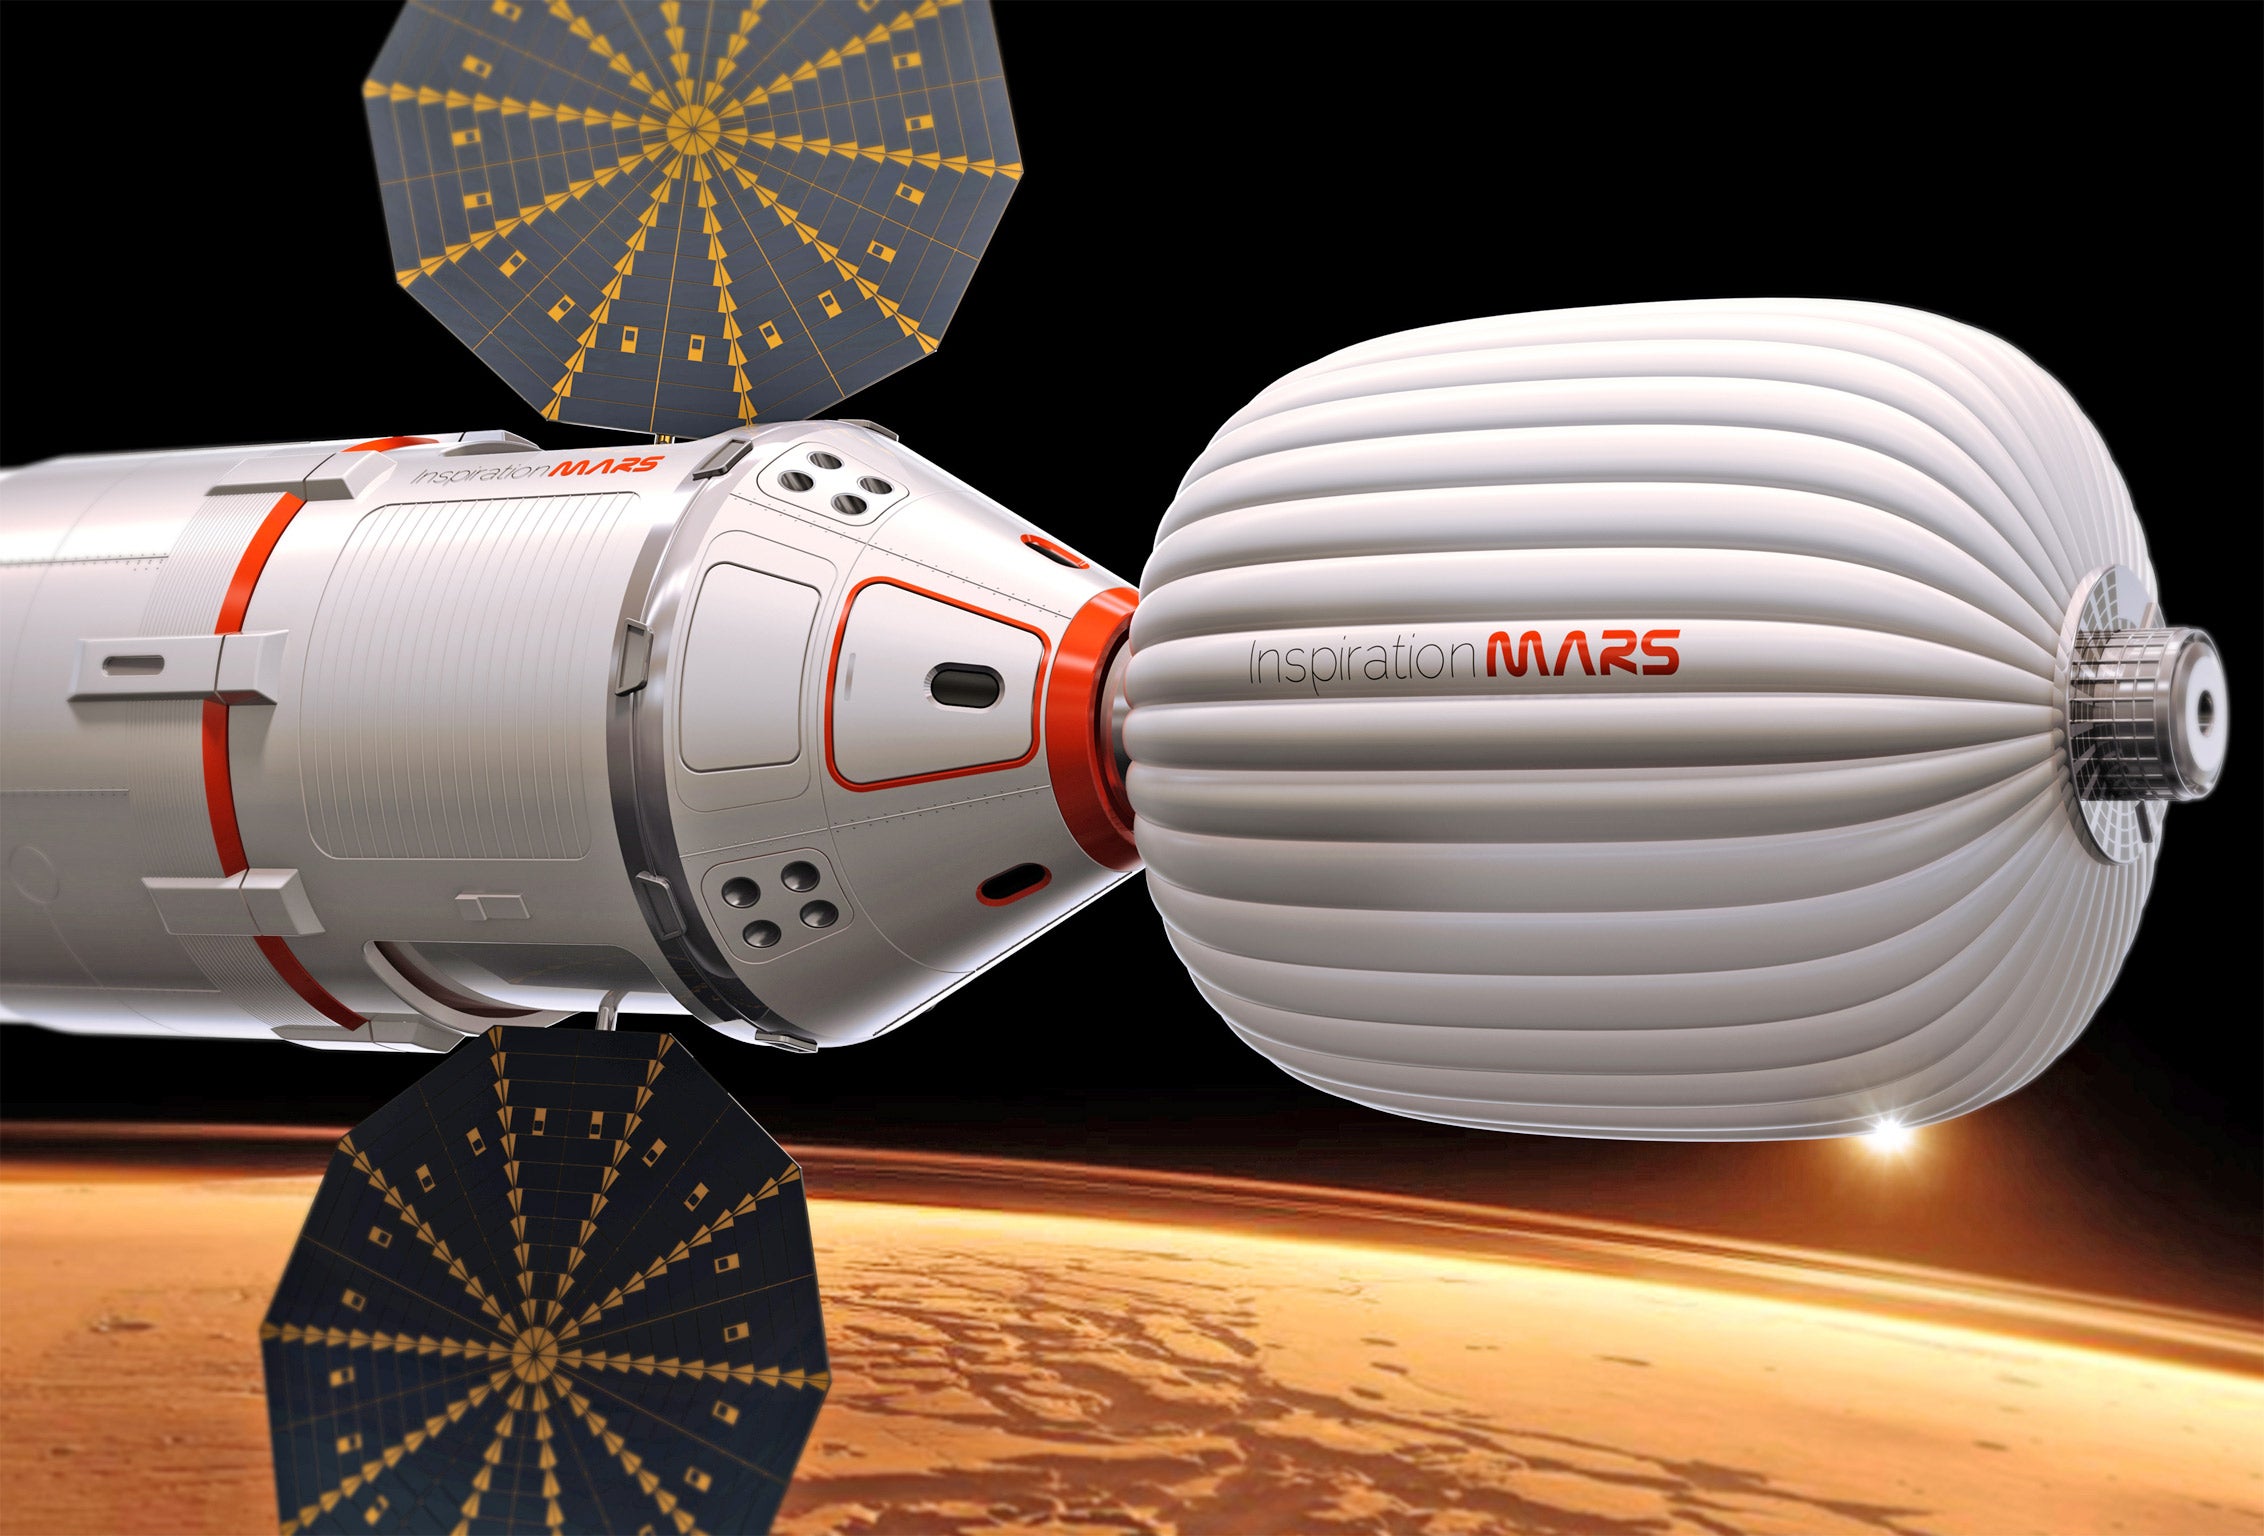 An artist's conception of a spacecraft envisioned by Inspiration Mars, a private group funded by Dennis Tito